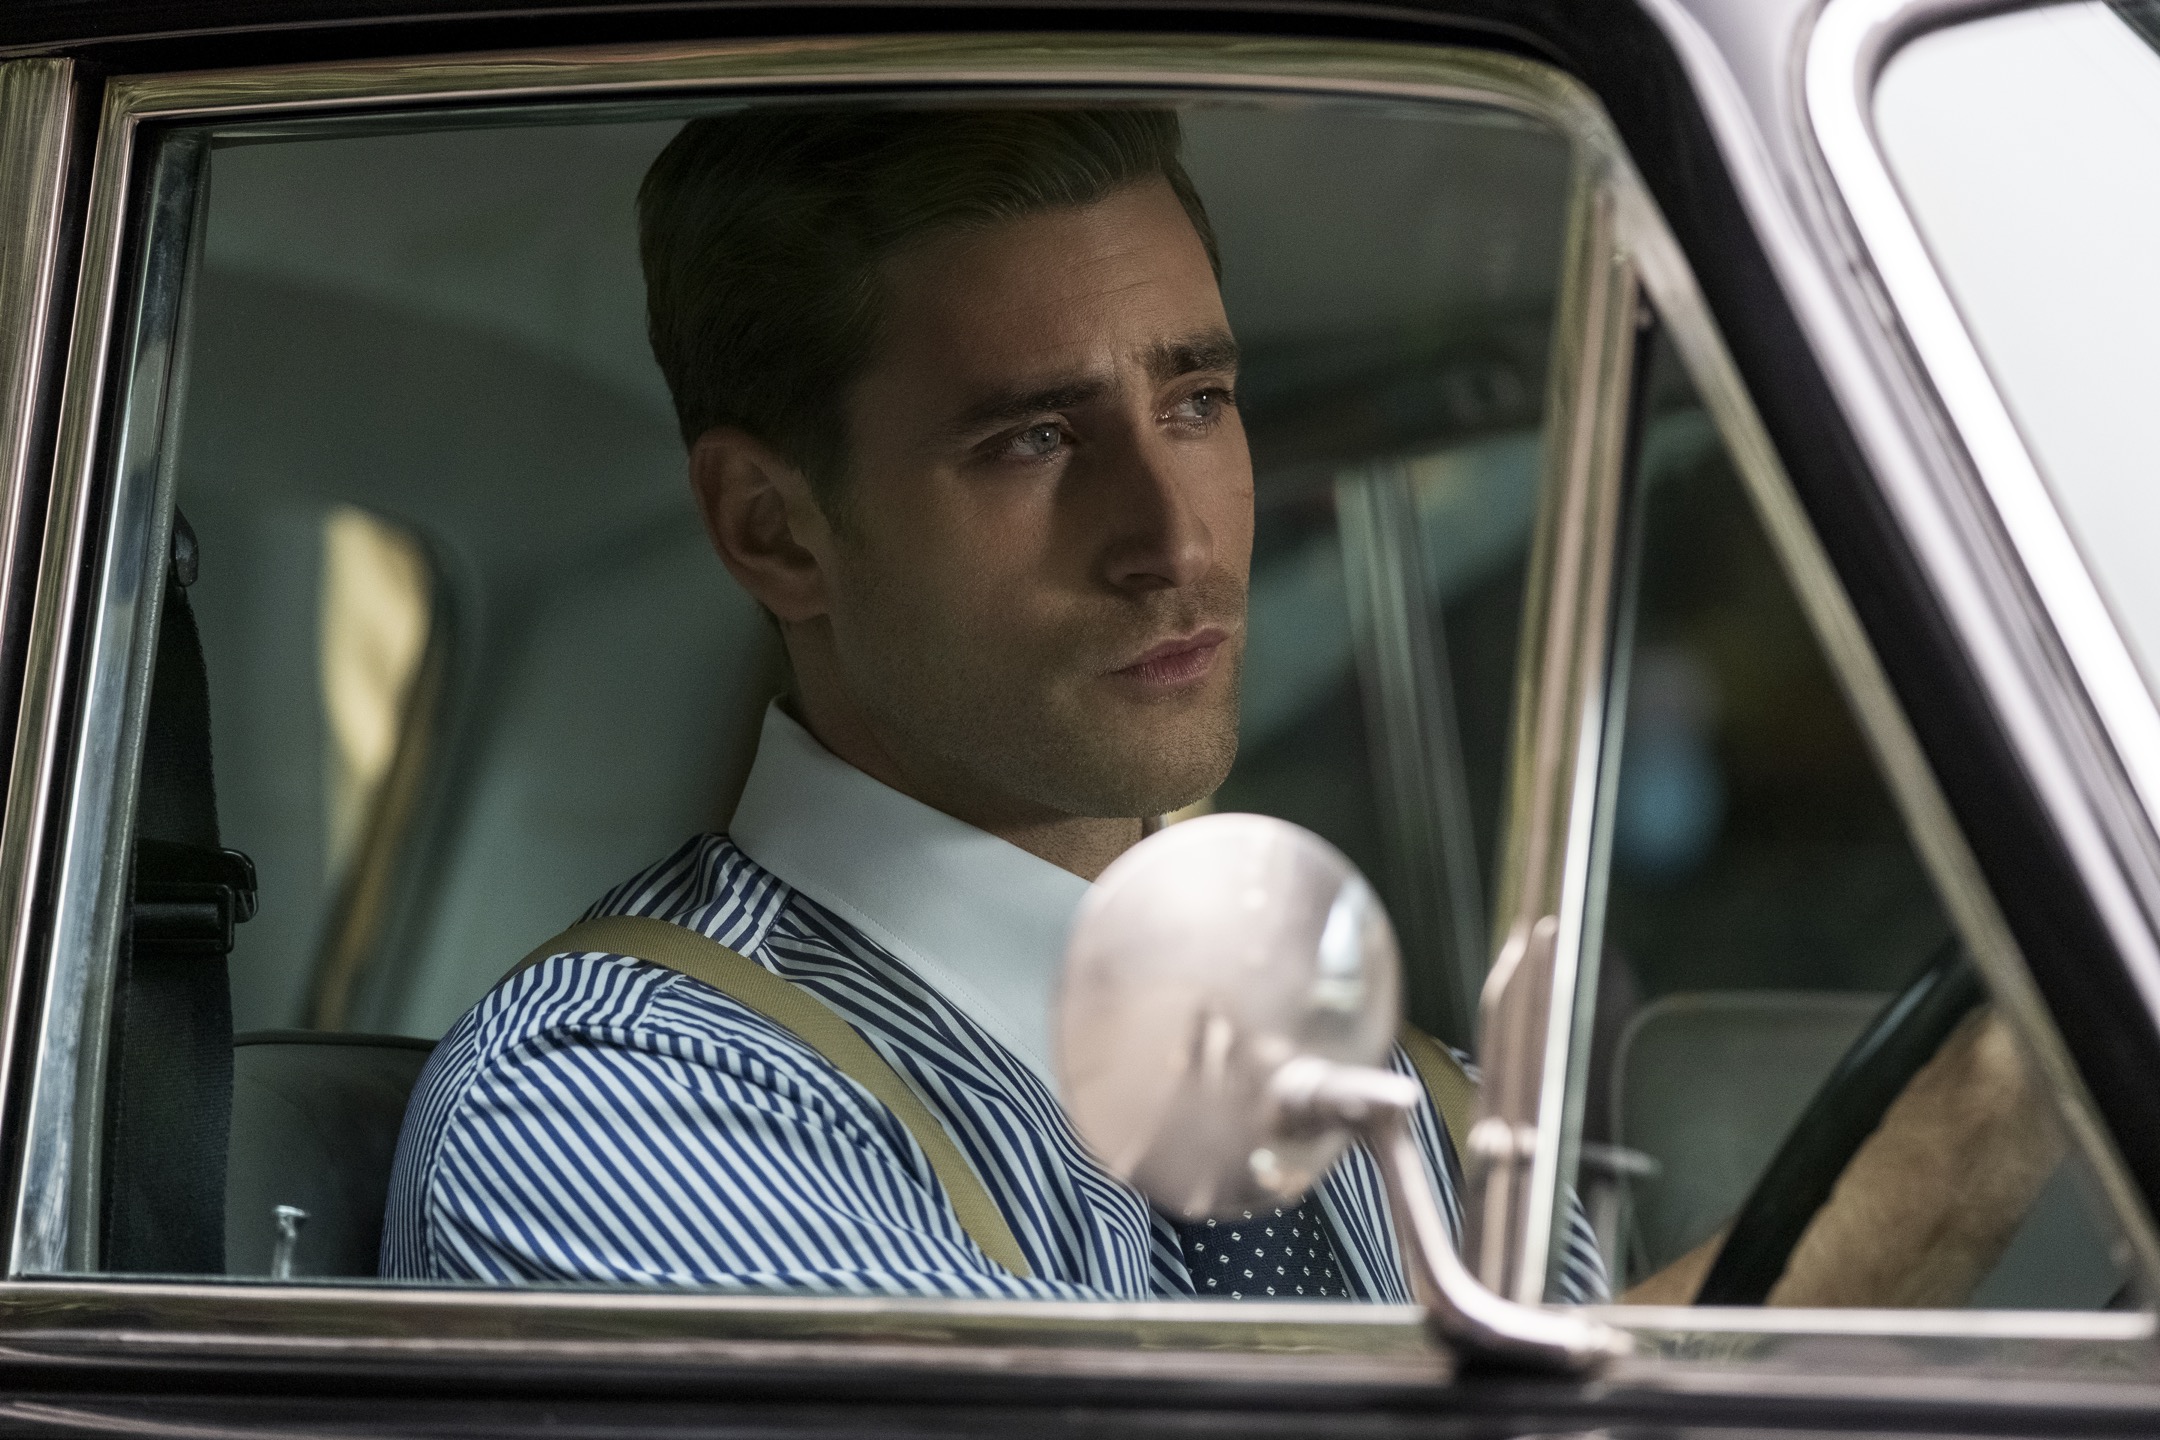 THE HAUNTING OF BLY MANOR (L to R) OLIVER JACKSON-COHEN as PETER QUINT in episode 103 of THE HAUNTING OF BLY MANOR Cr. EIKE SCHROTER/NETFLIX © 2020